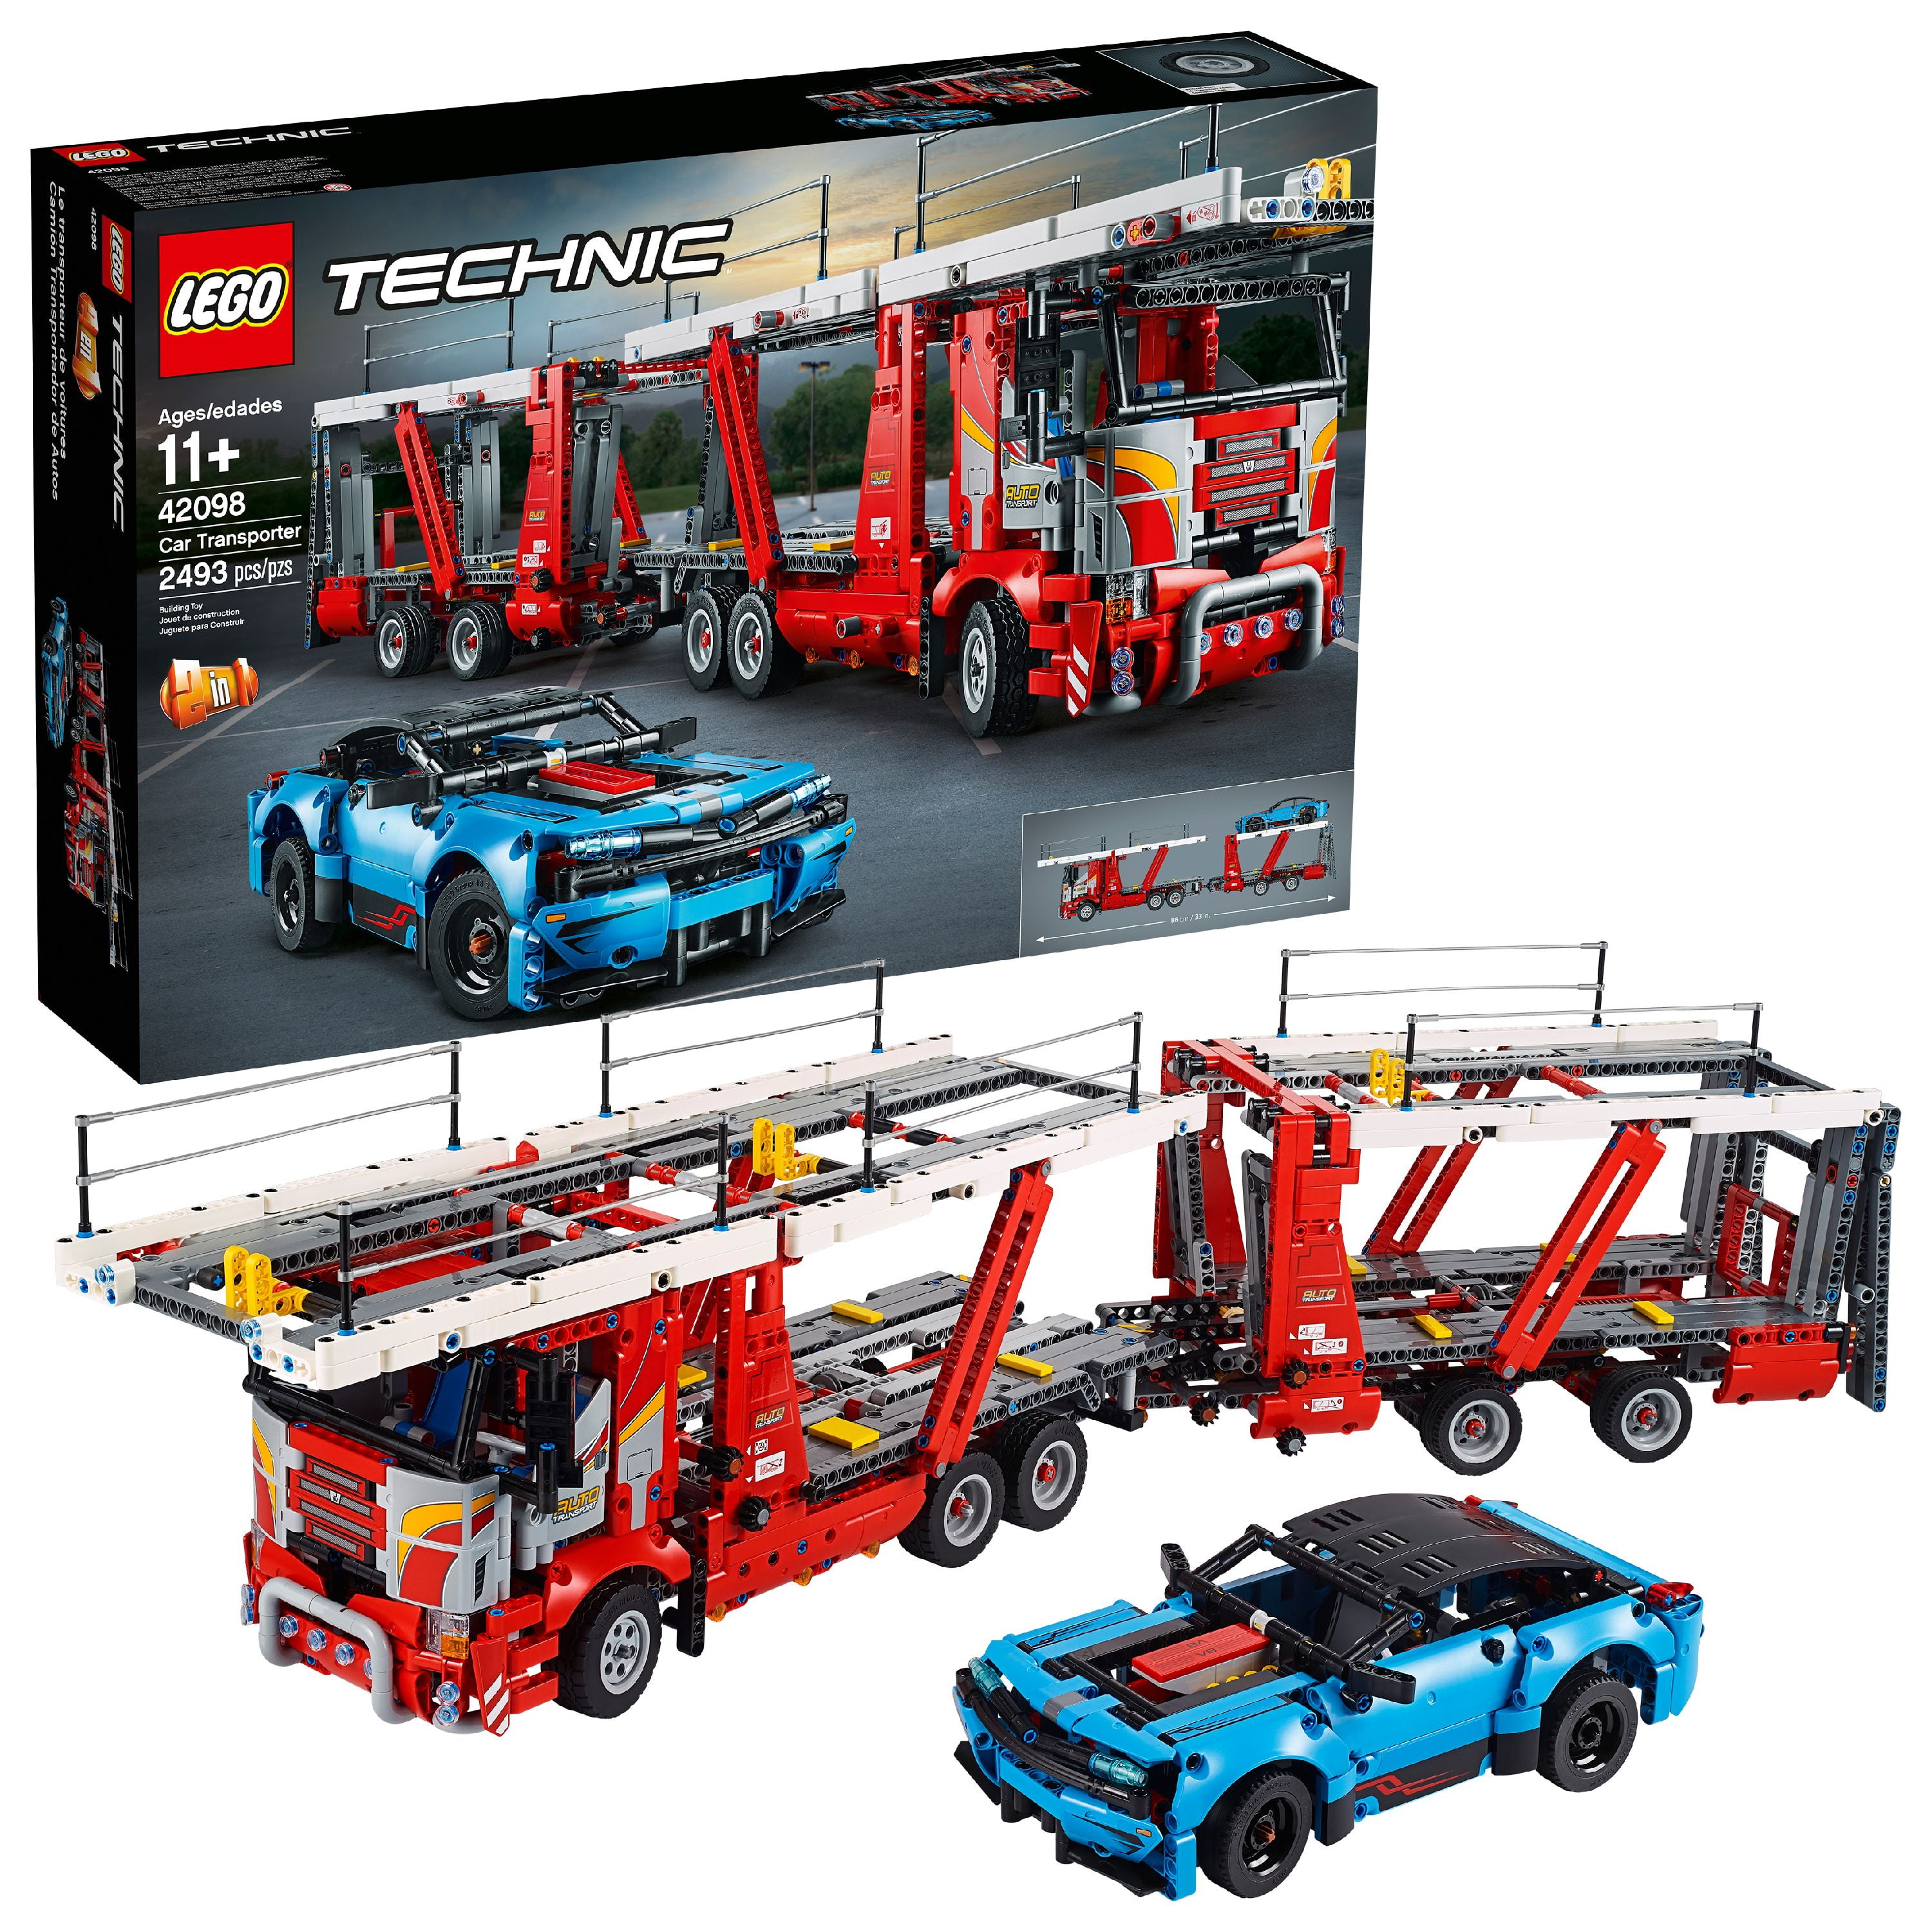 LEGO Technic Car Transporter 42098 Toy Truck And Trailer Building Set ...